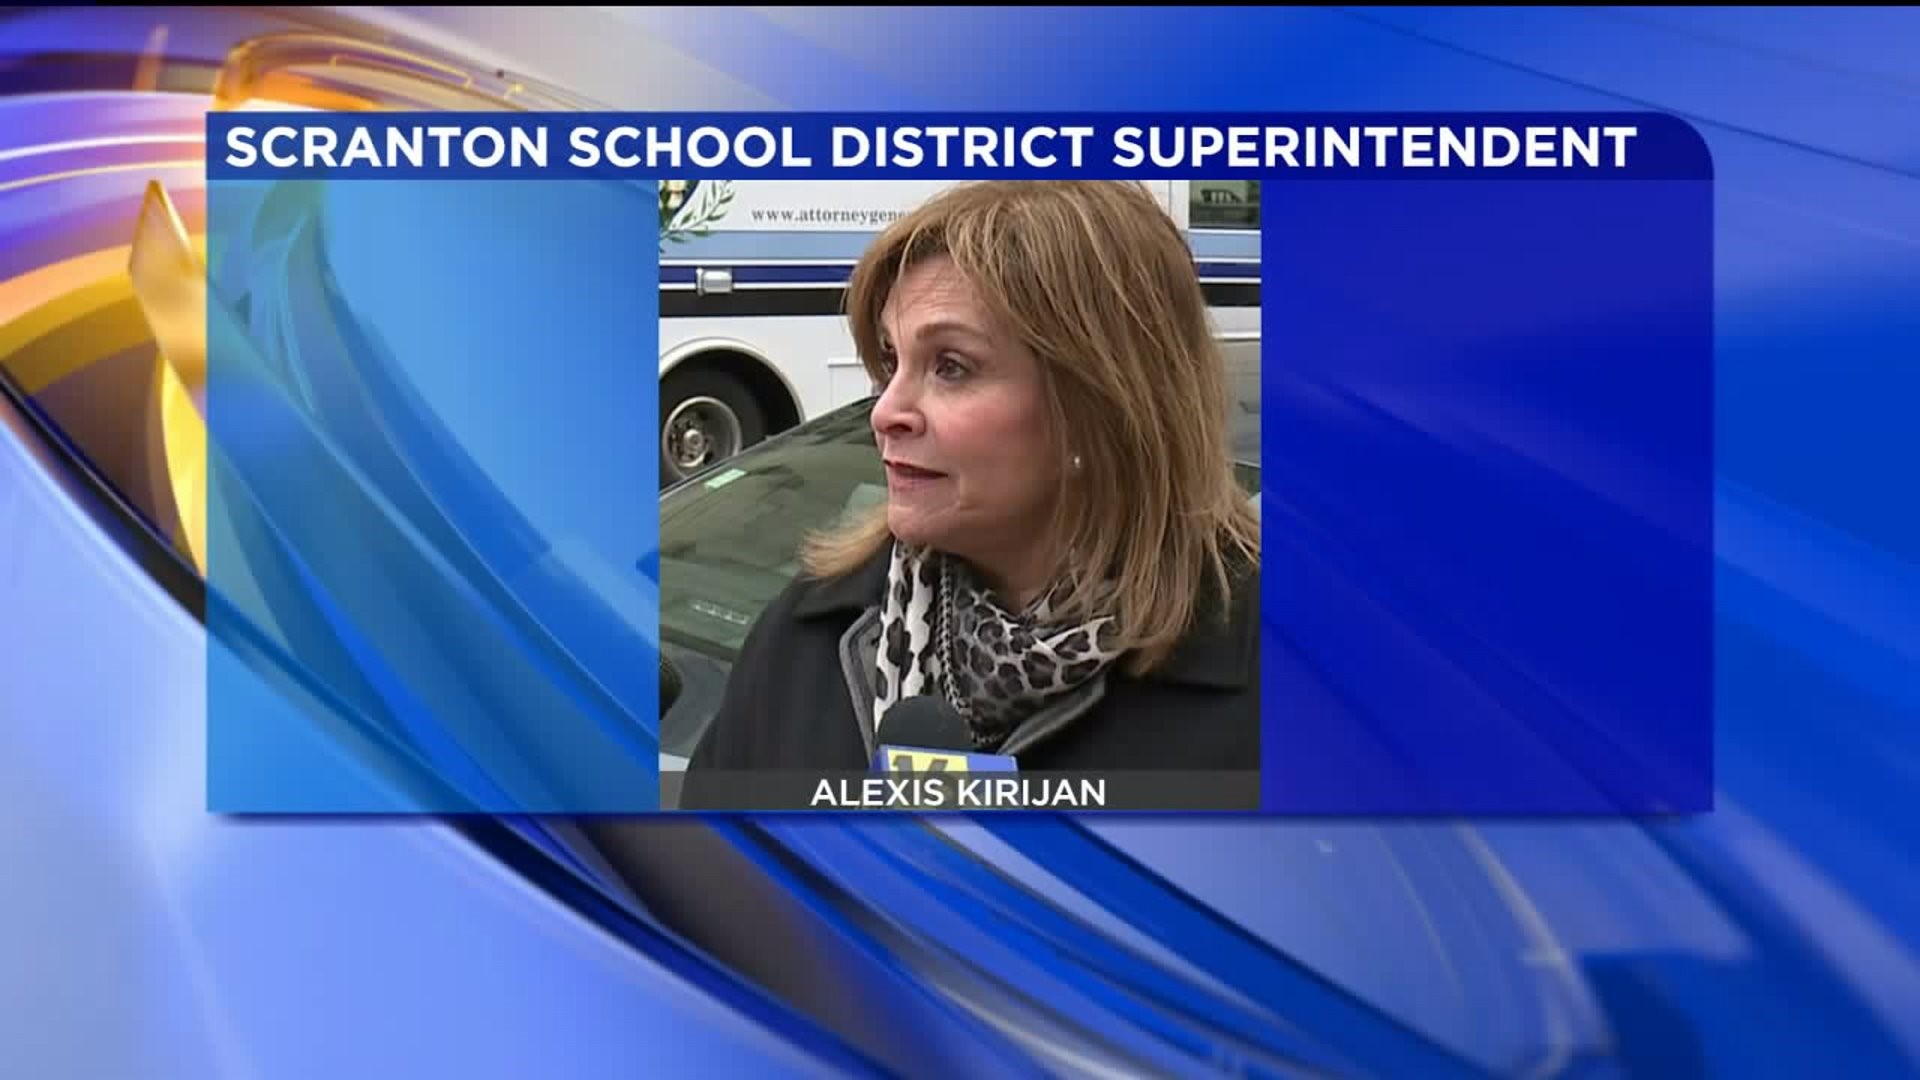 Buyout in the Works for Scranton School District Superintendent